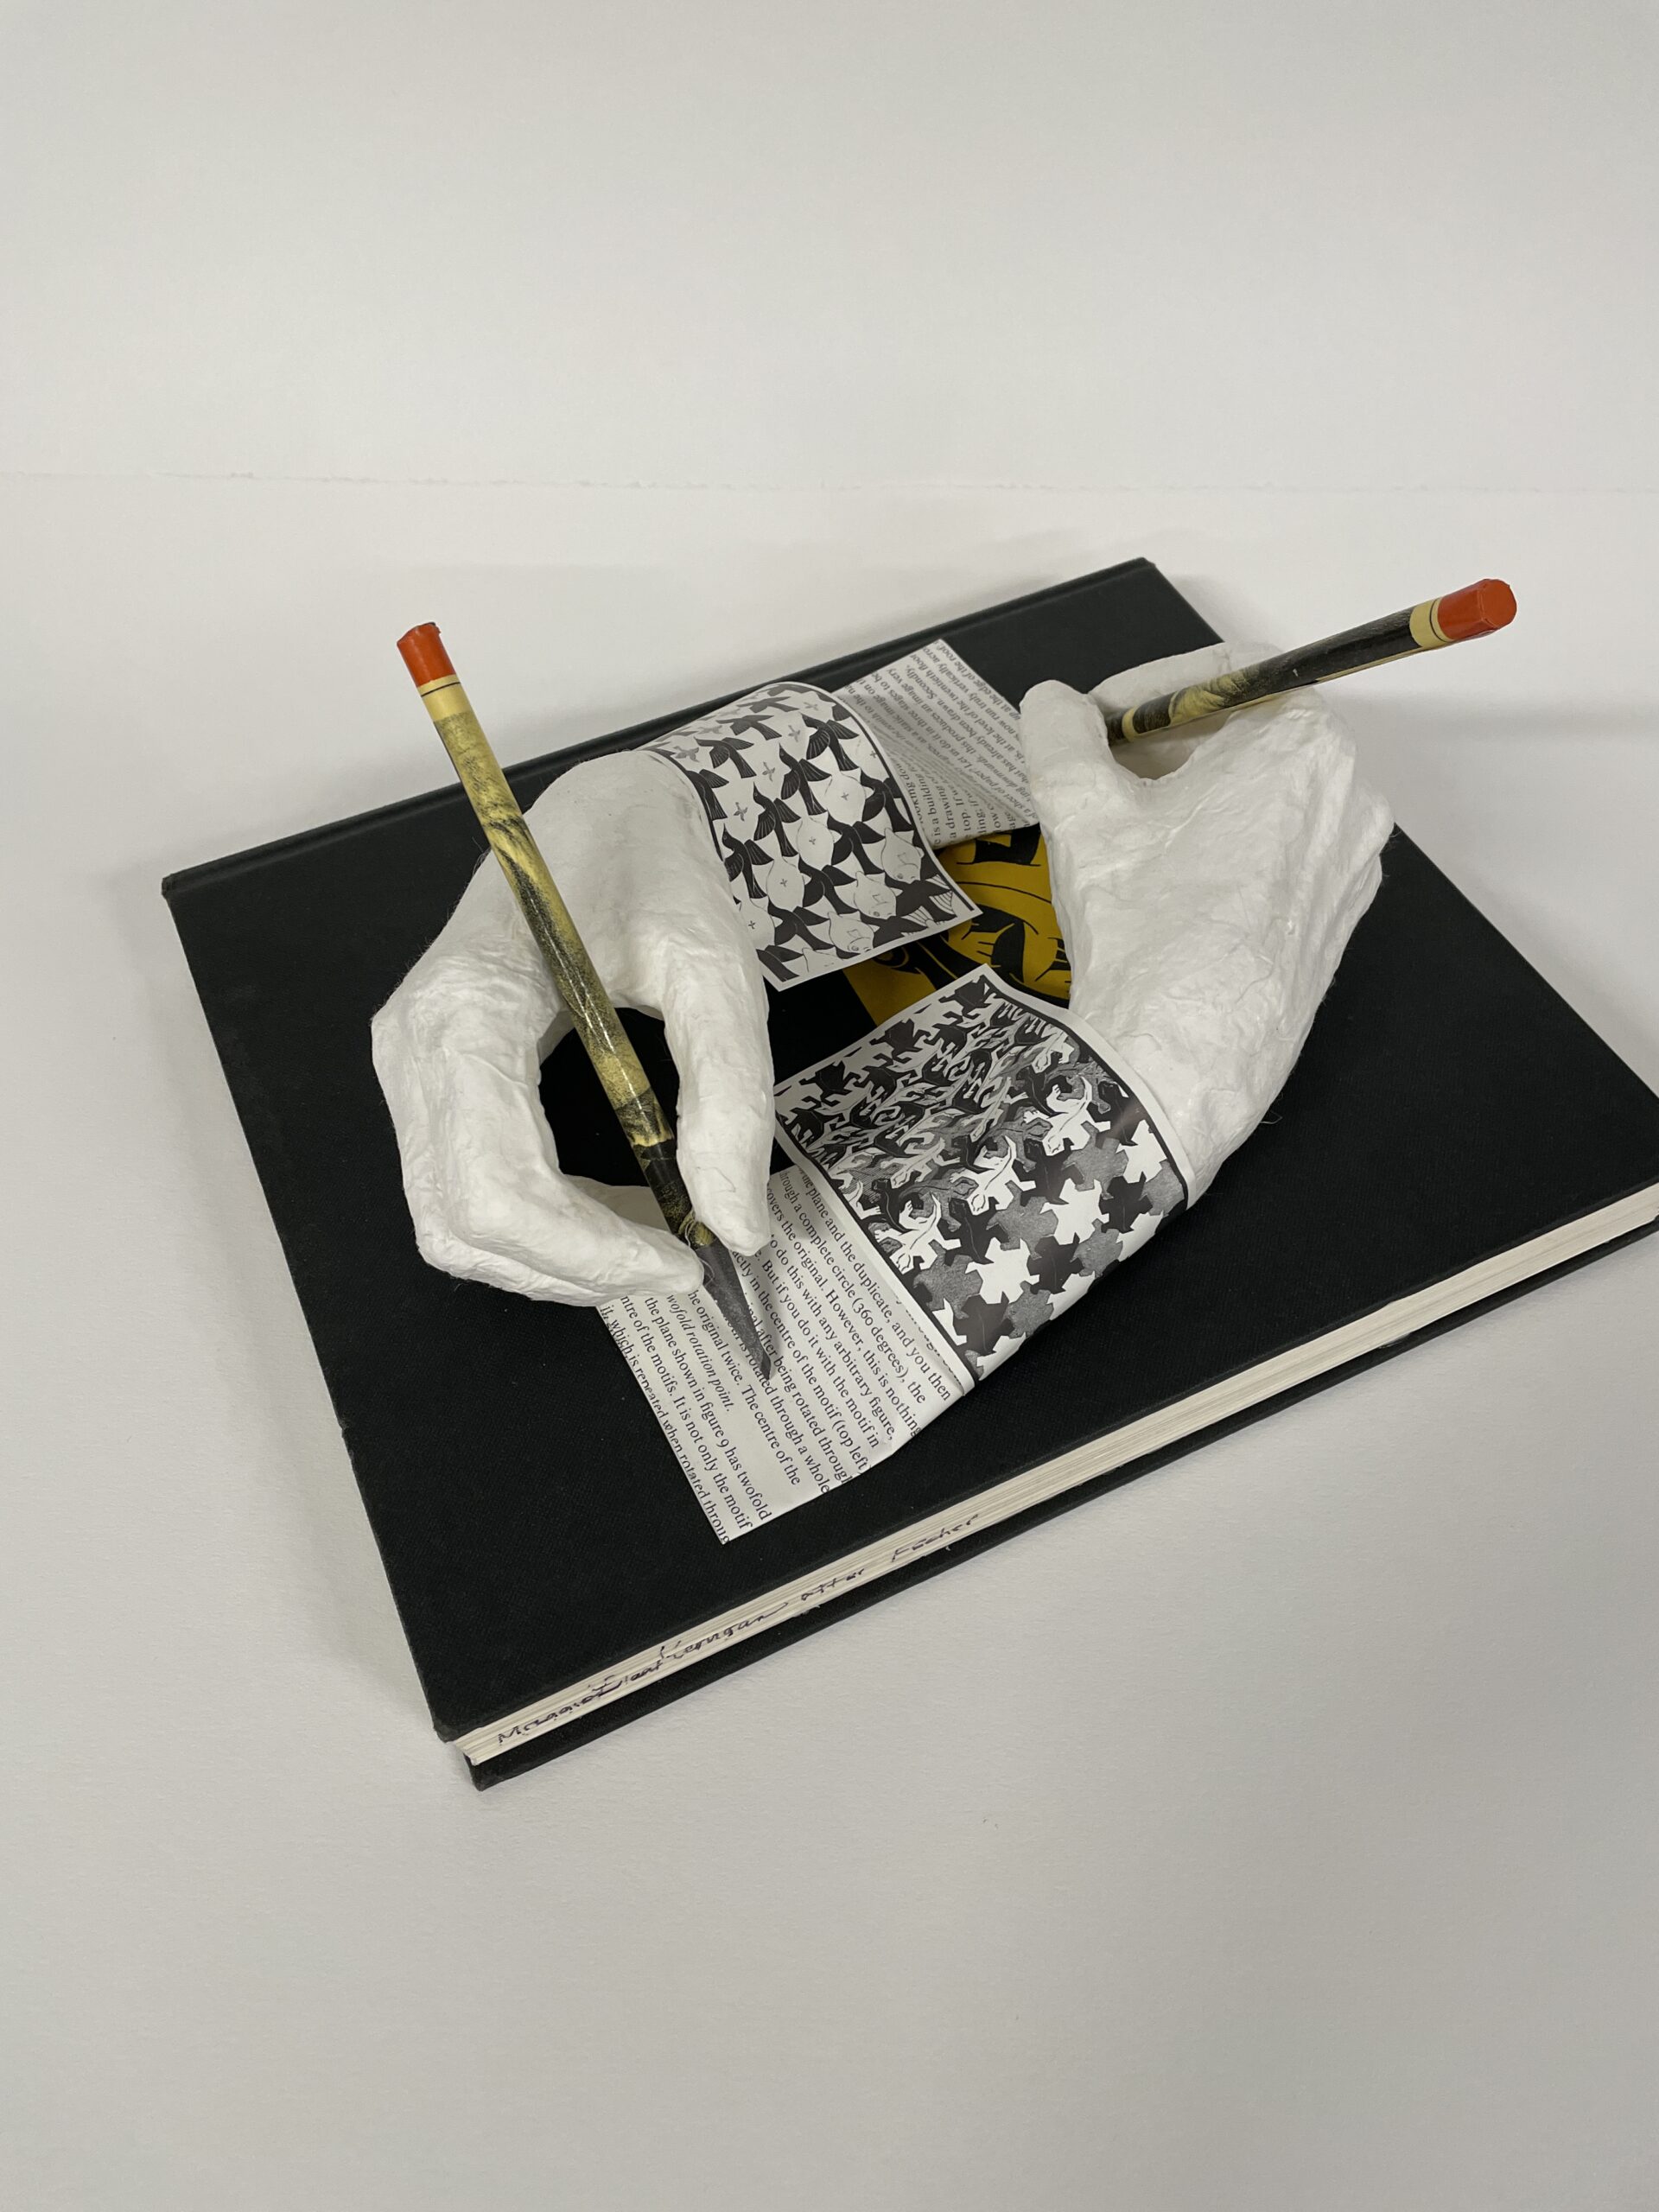 M.C. Escher's famous "drawing hands" have been recreated in 3D by artist Maggie Kerrigan using paper and a book about Escher.